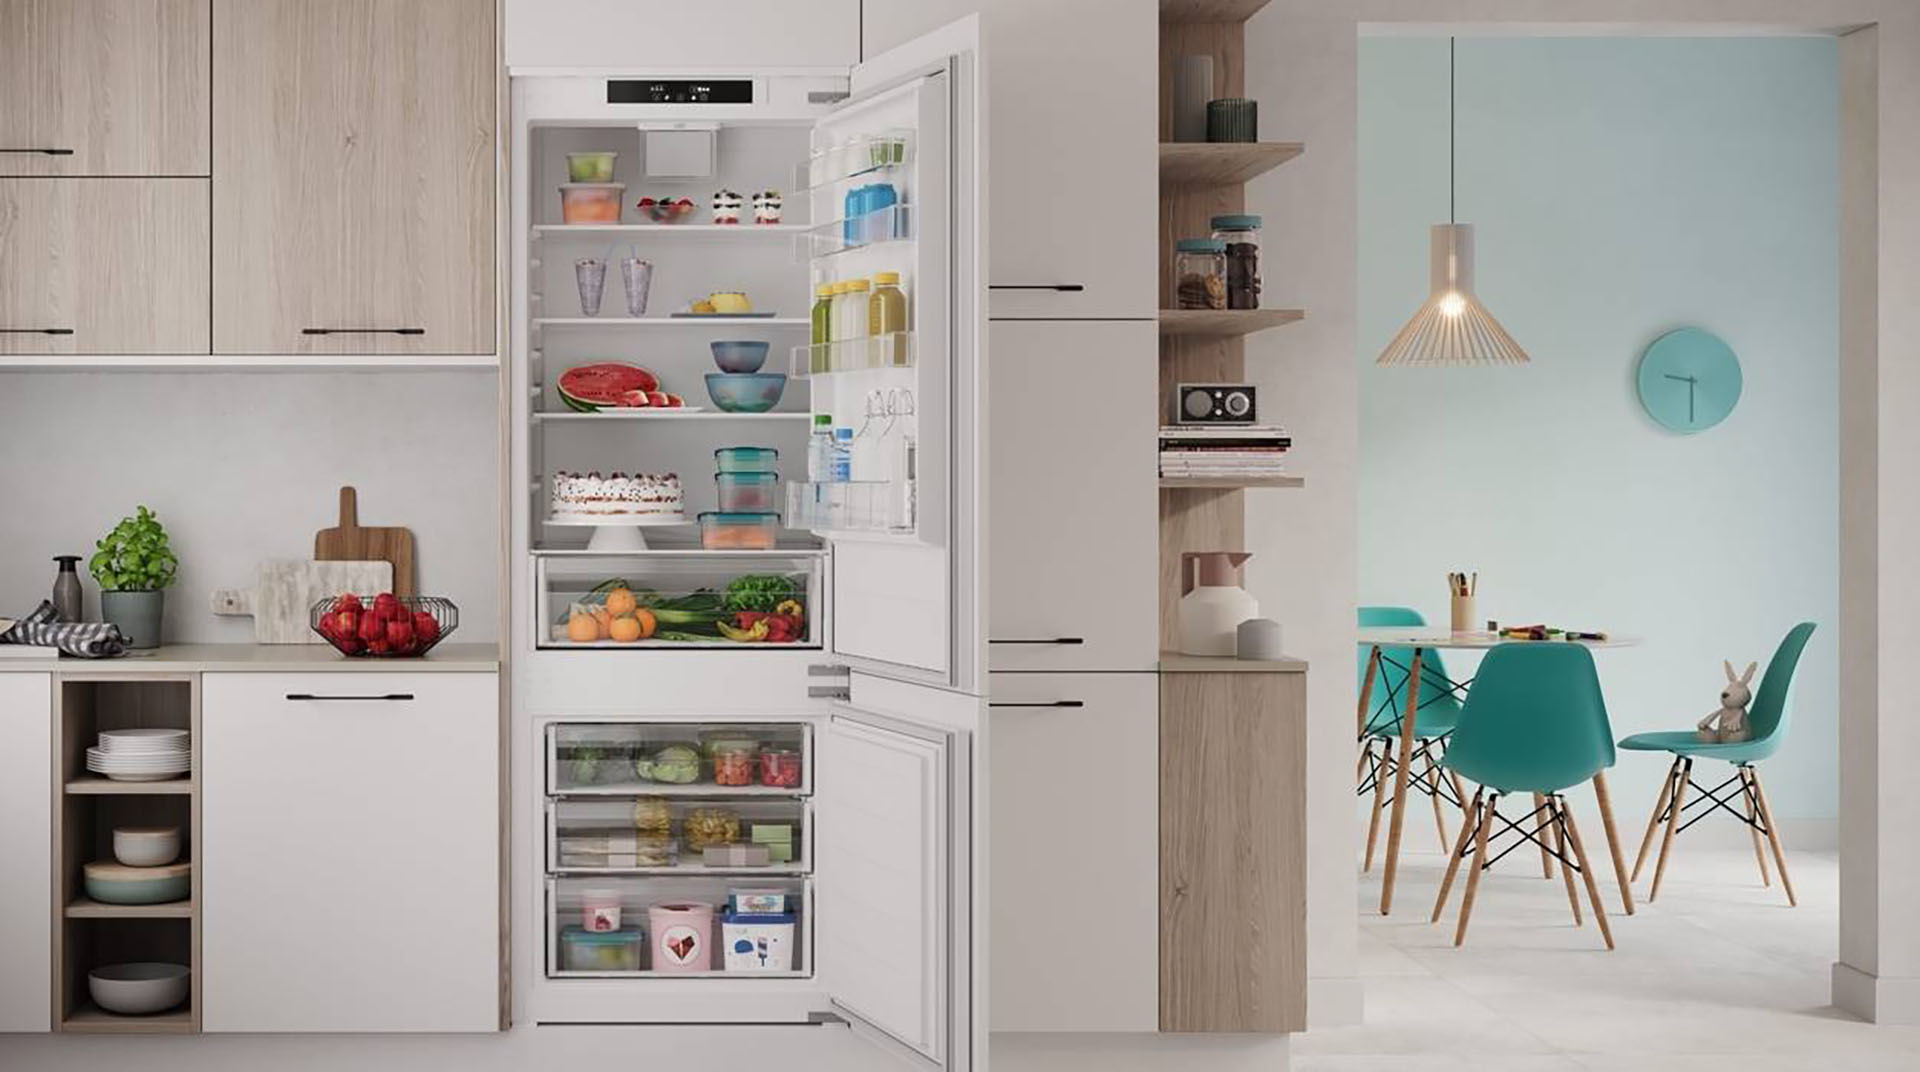 More space for your shopping and less waste with the Indesit Space 400 fridge